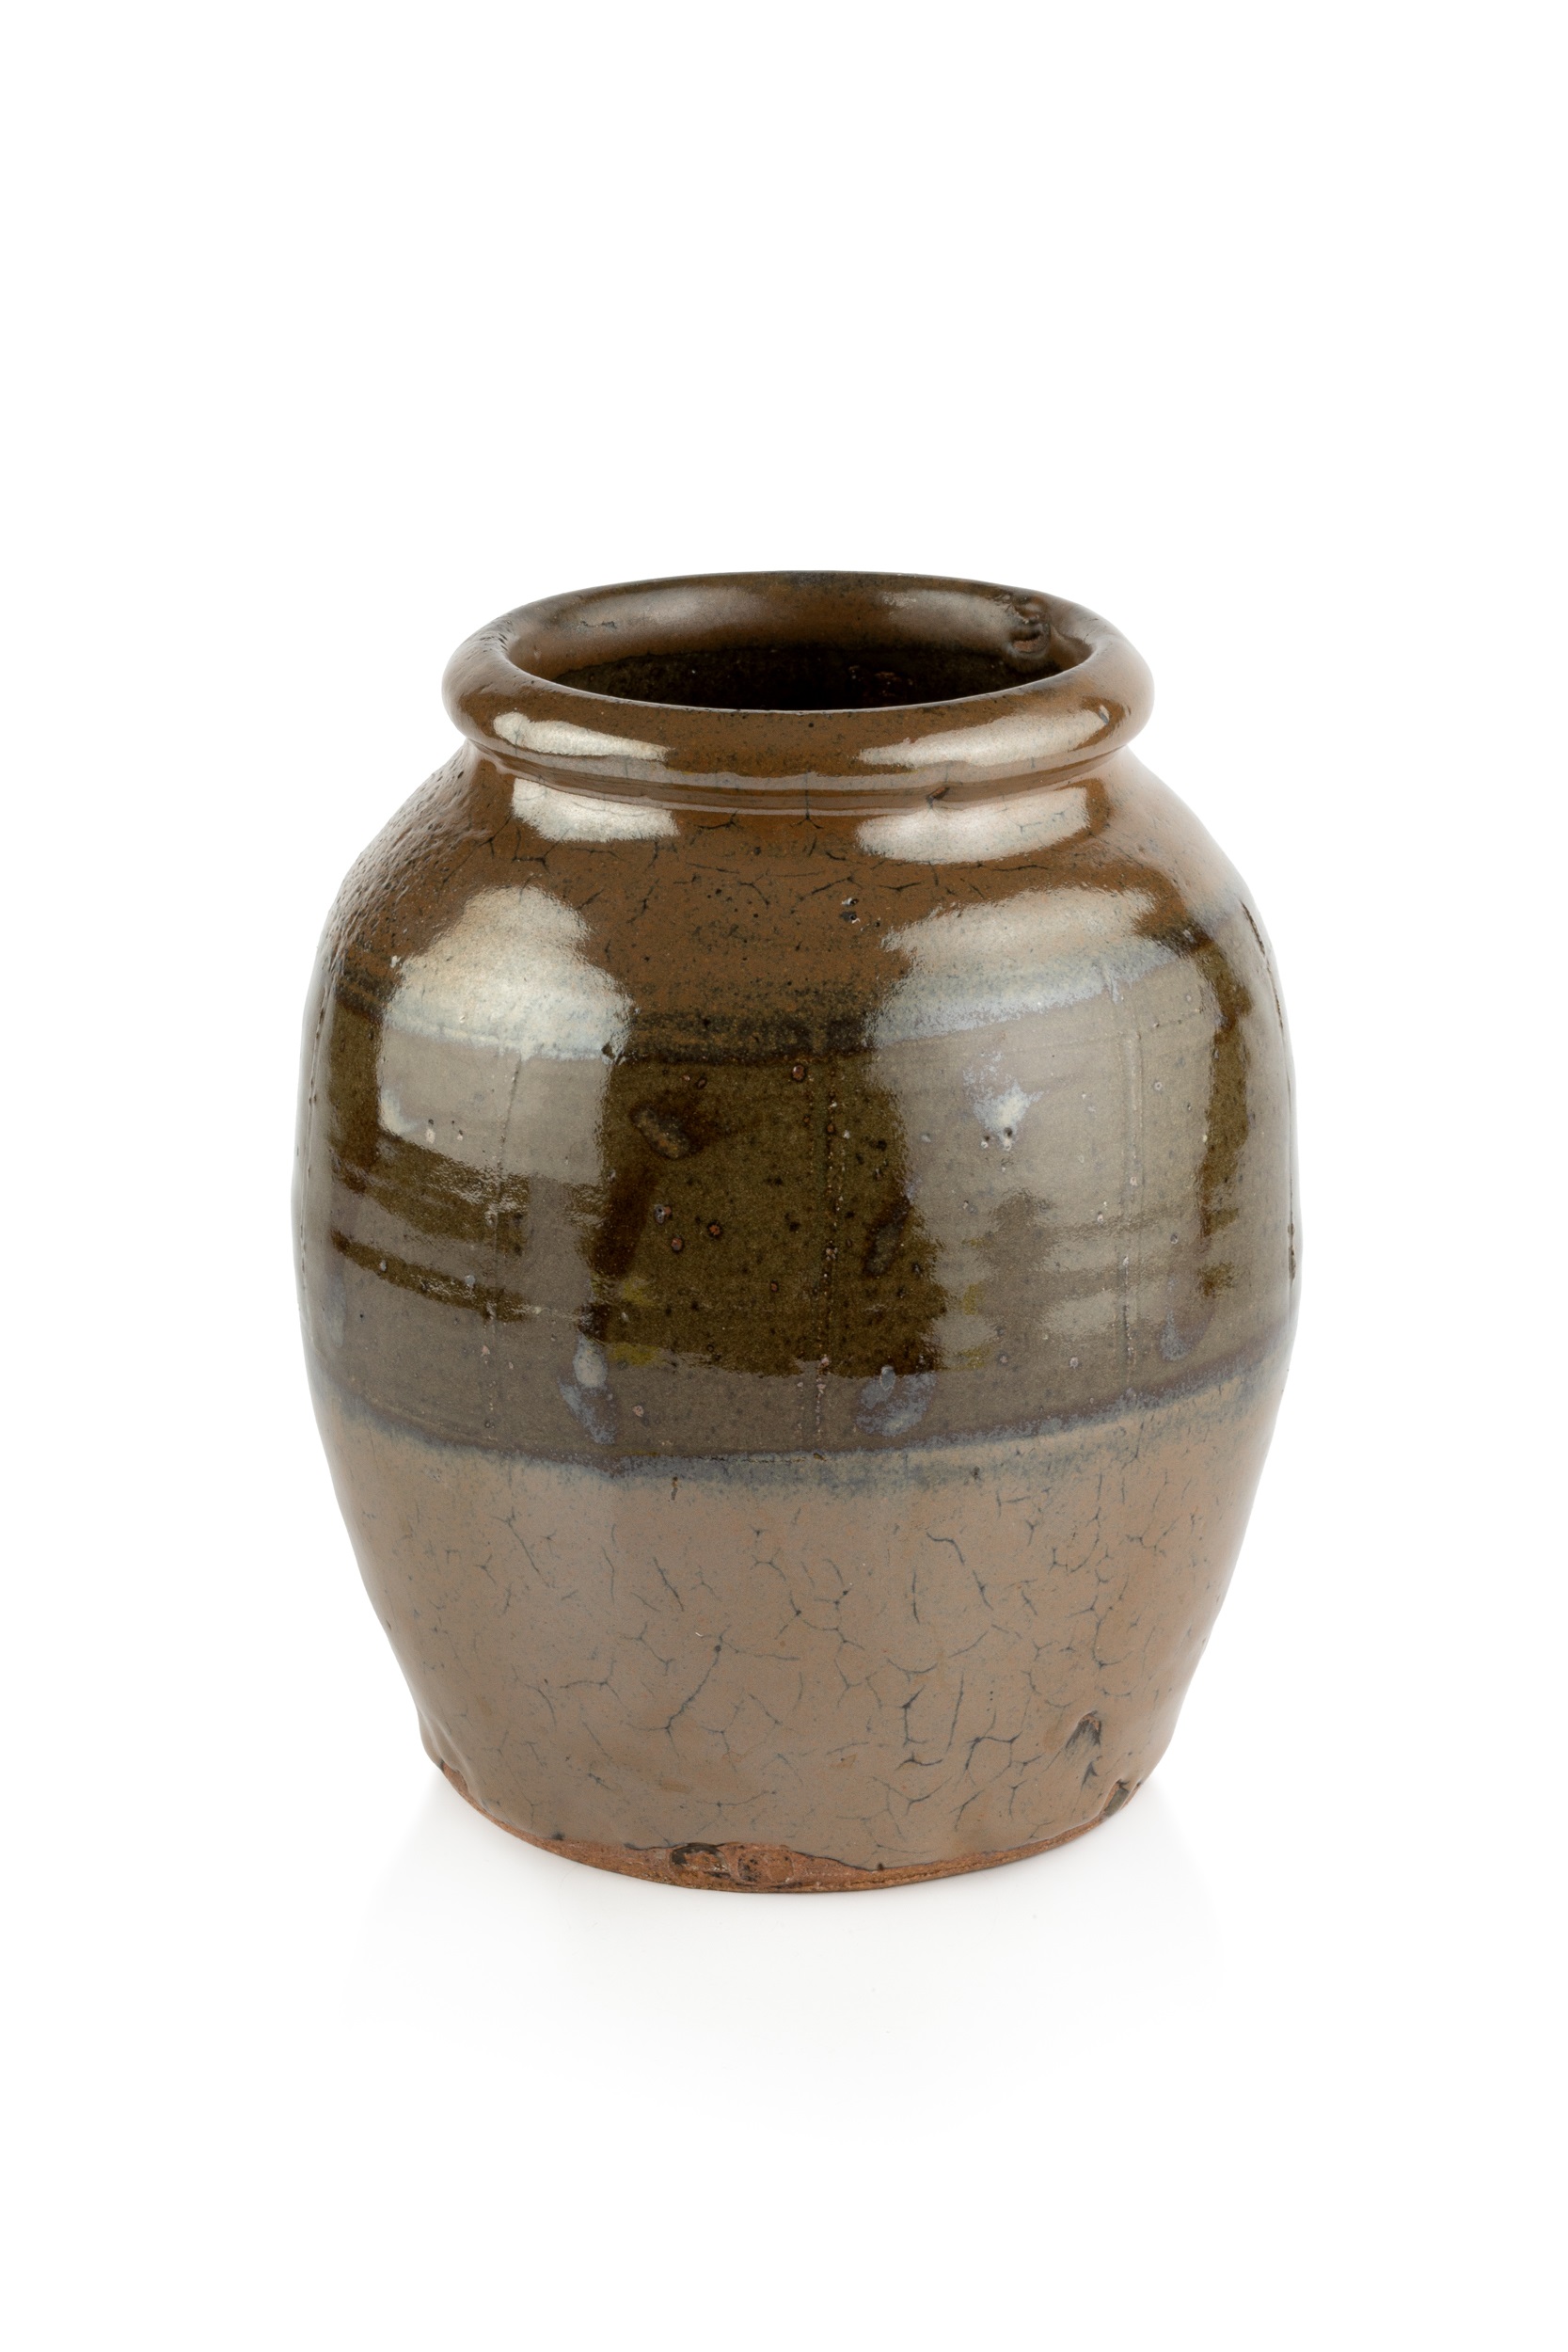 Leach Pottery Vase stoneware, the green and brown glaze with brushwork lines impressed potter's seal